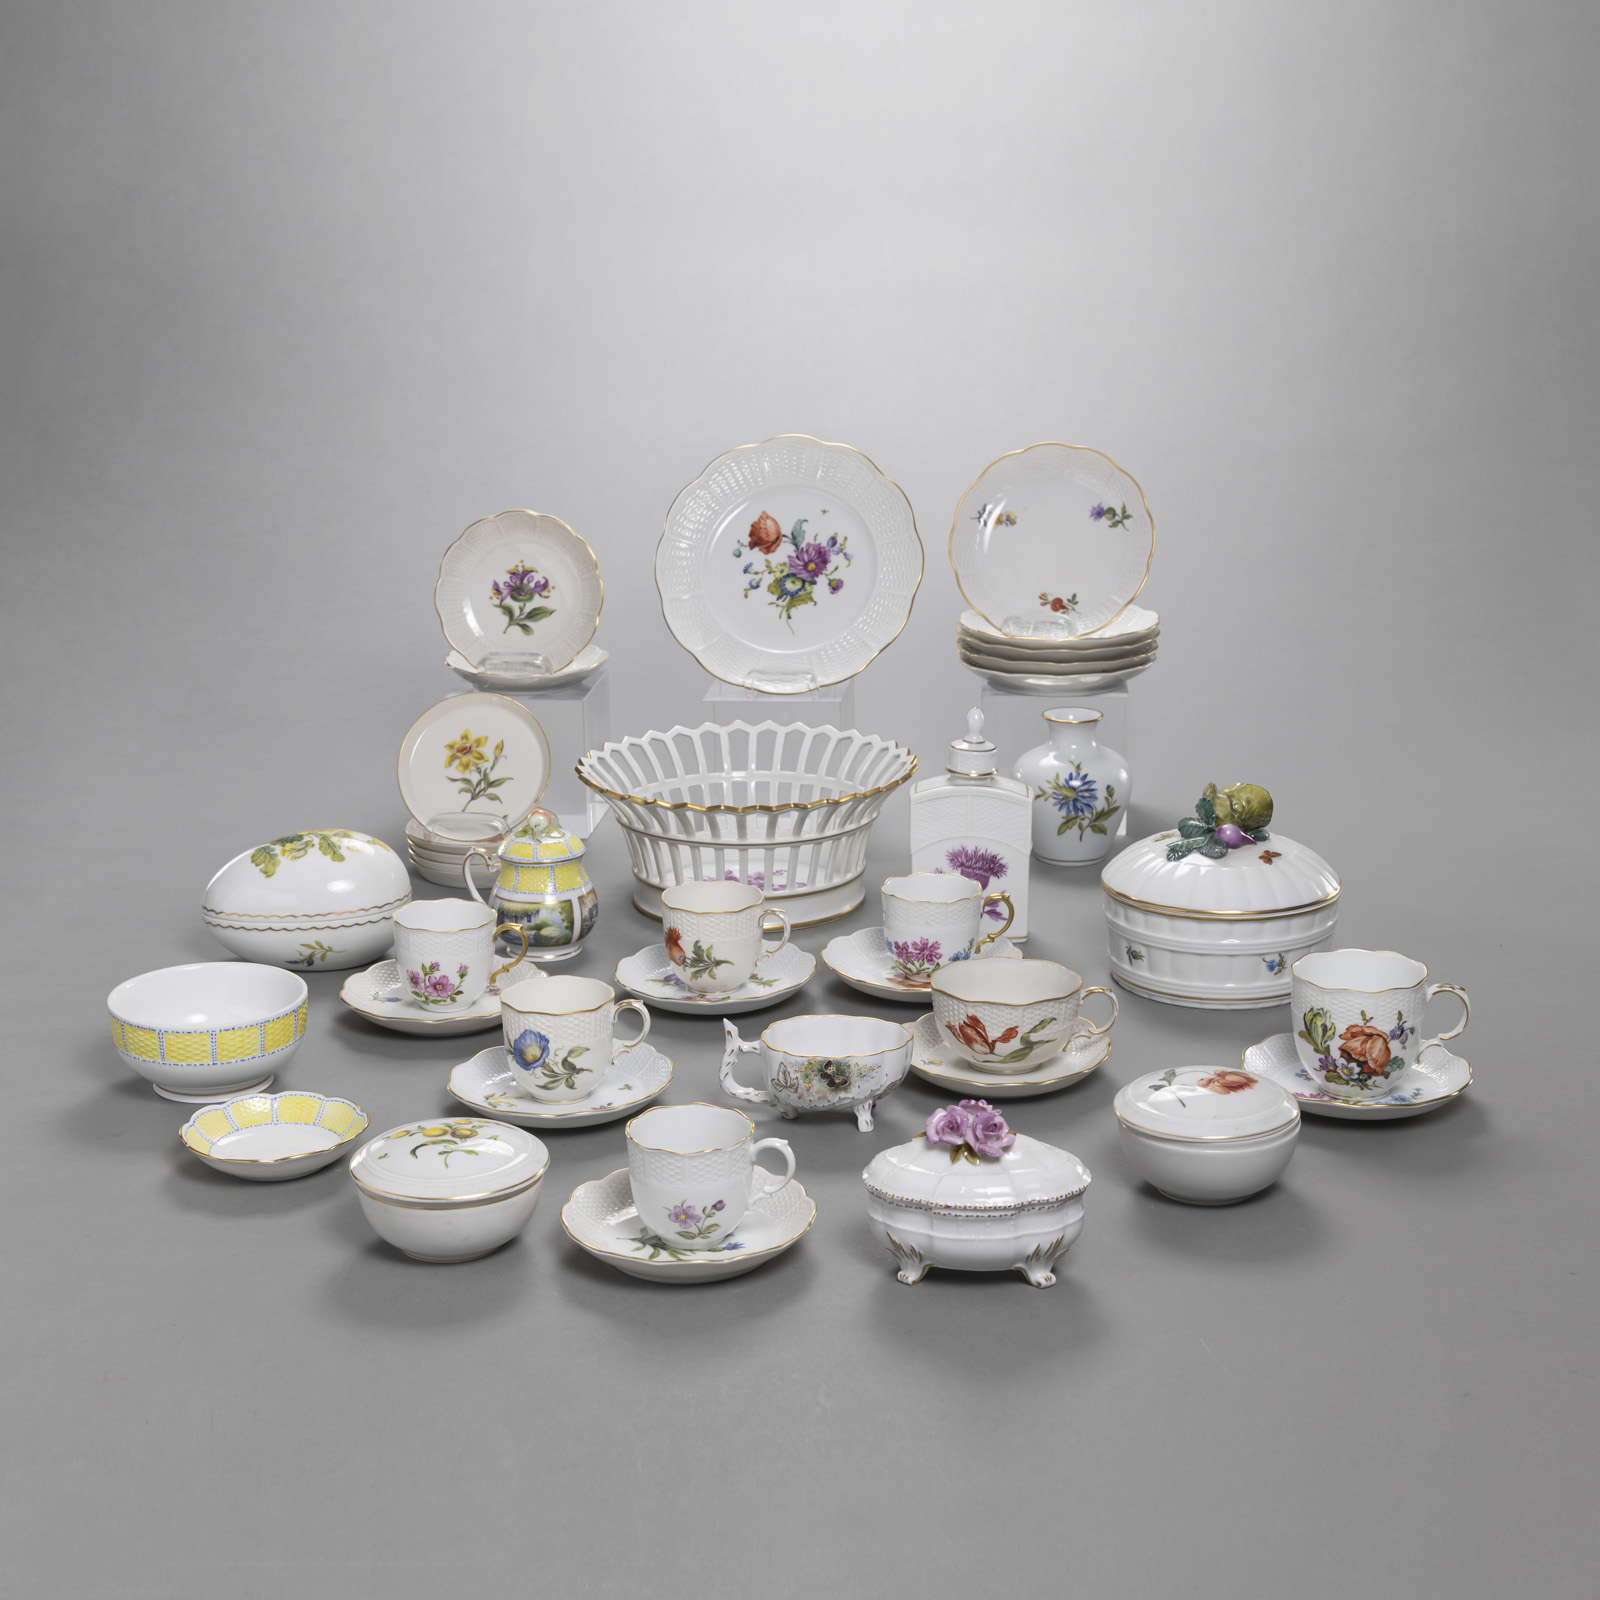 A MIXED LOT OF LUWIGSBURG PORCELAIN PIECES